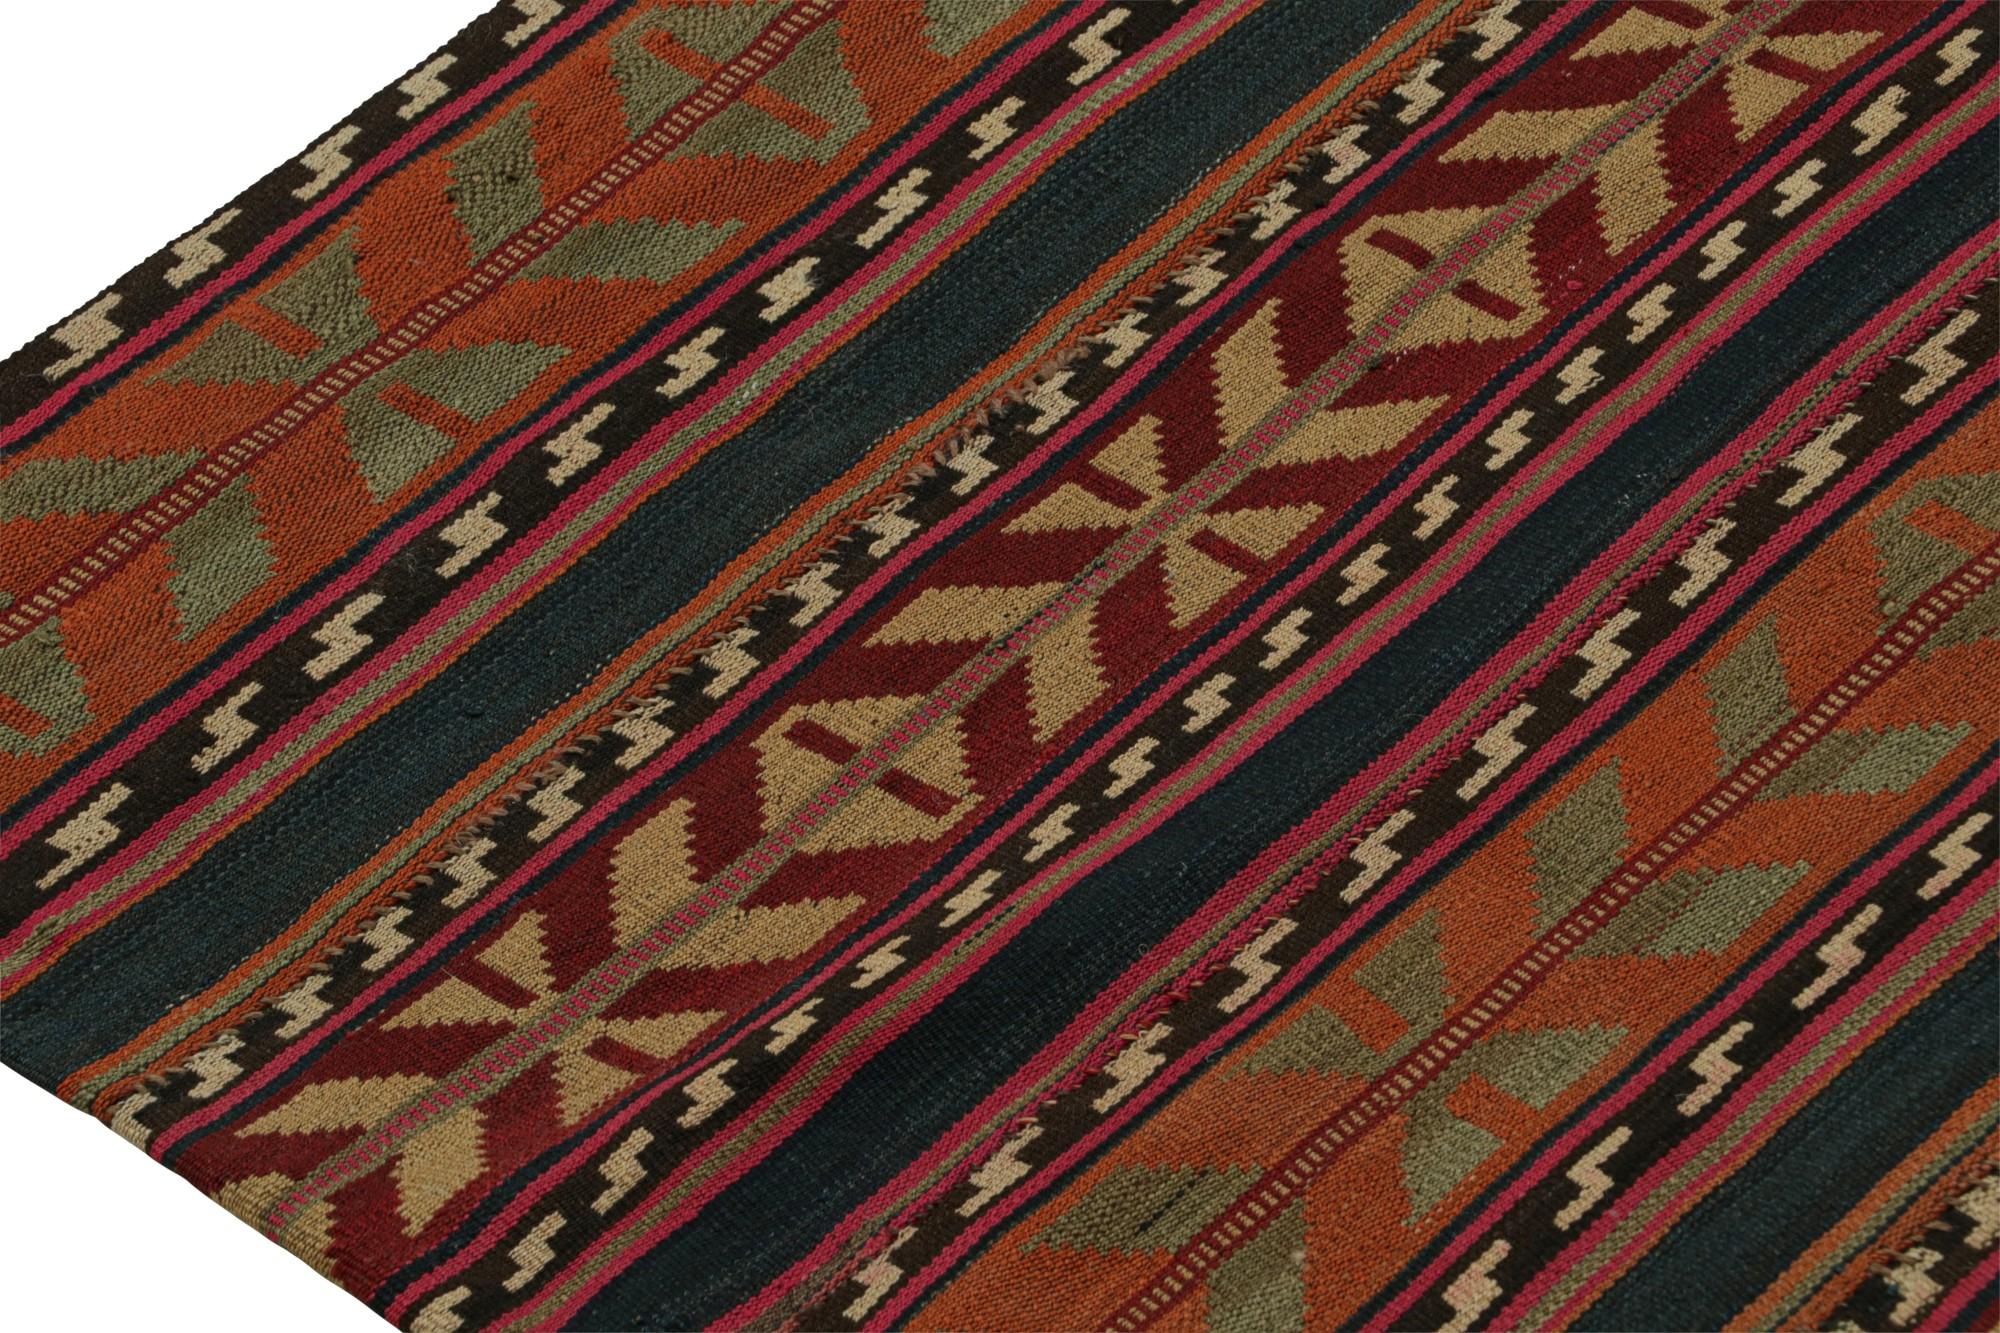 Vintage Tribal Kilim rug in Polychromatic Geometric Patterns by Rug & Kilim In Good Condition For Sale In Long Island City, NY